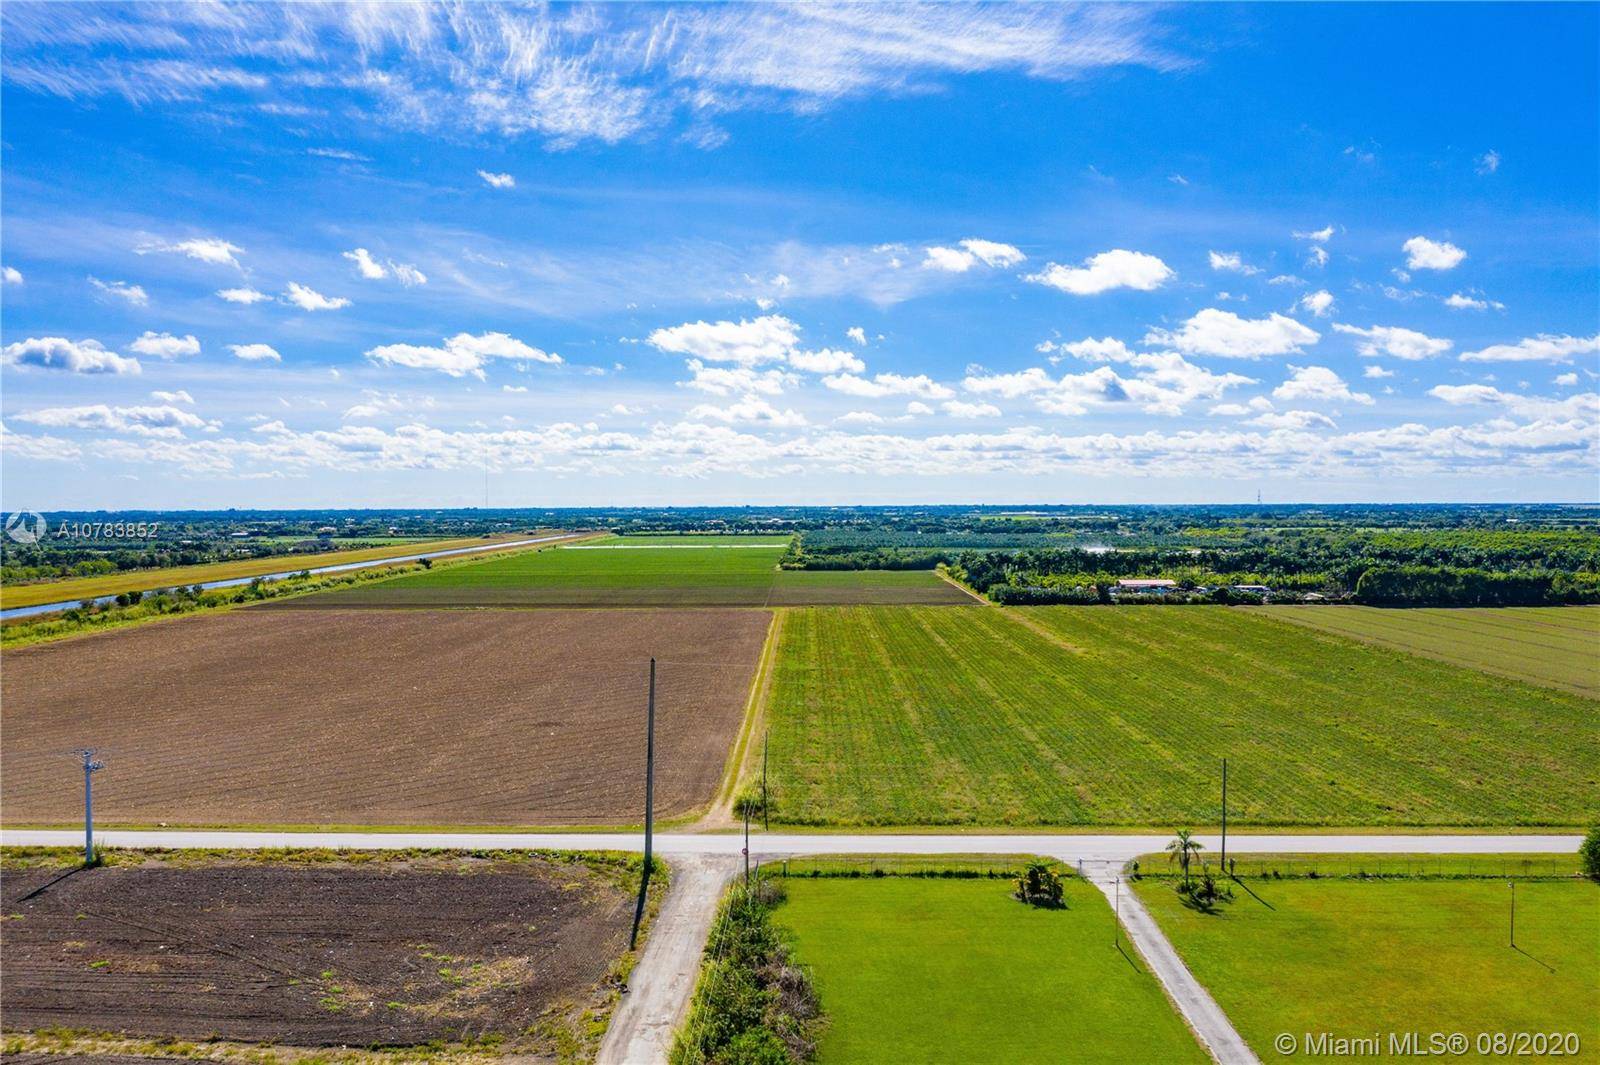 109. 93 of agricultural land in Miami Dade for sale West of Krome Avenue.